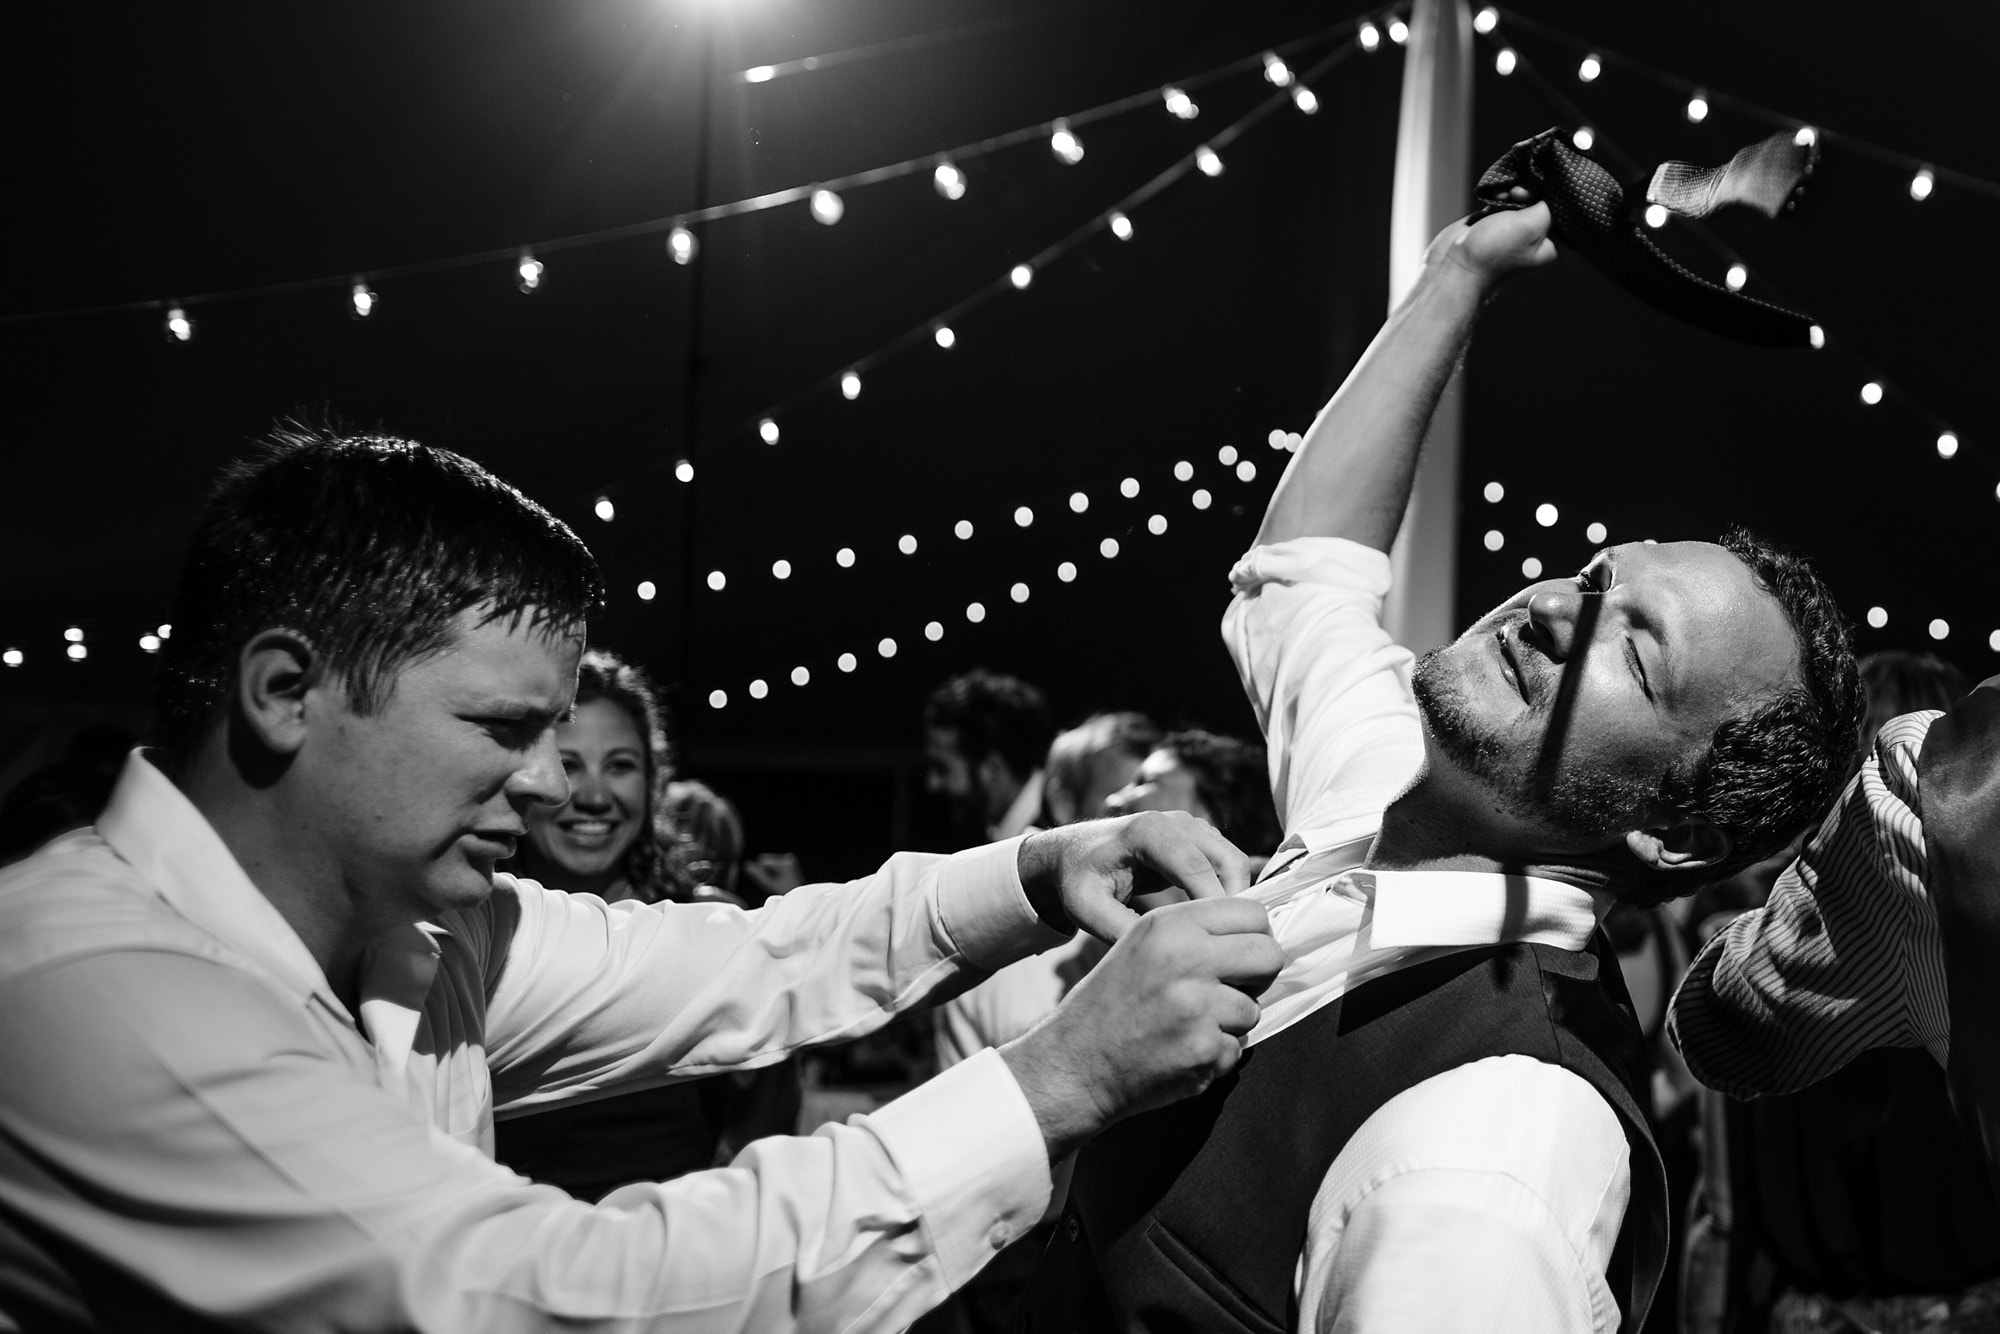 Wedding guests wave their ties in the air while dancing at the reception at Willor Harbor Vineyards in Three Oaks Michigan.